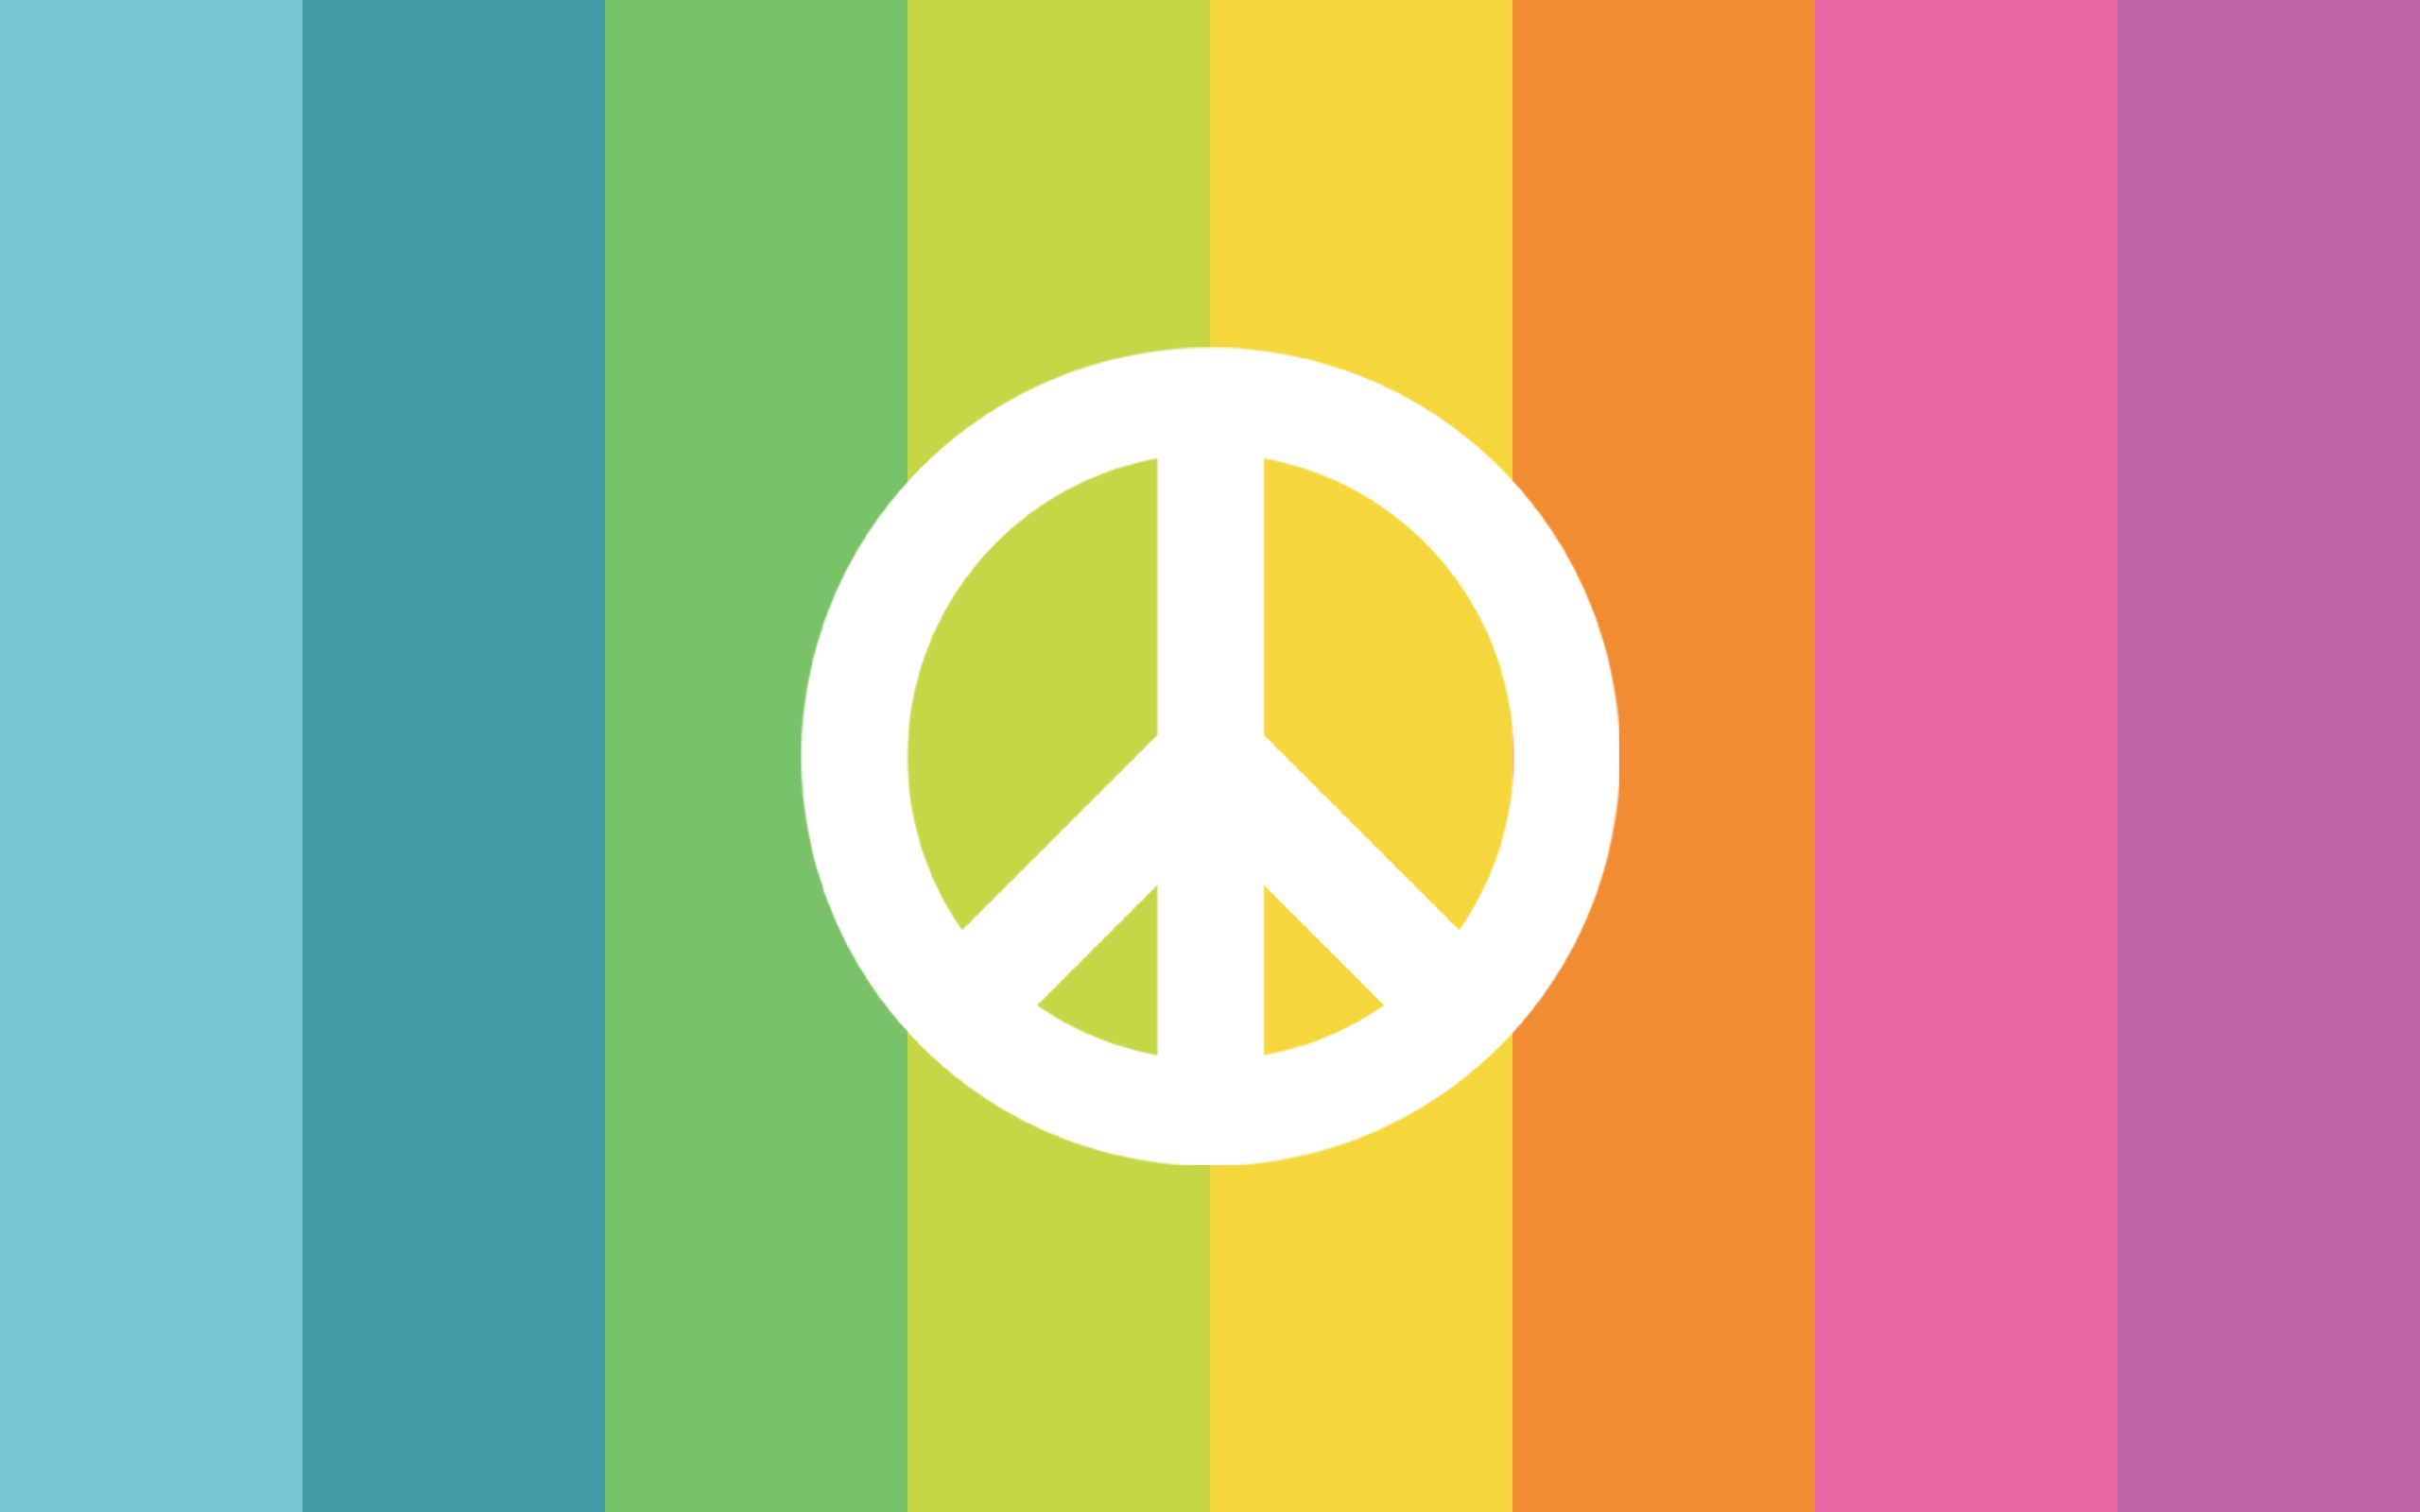 Cool Peace Sign Wallpaper Galleryhip The